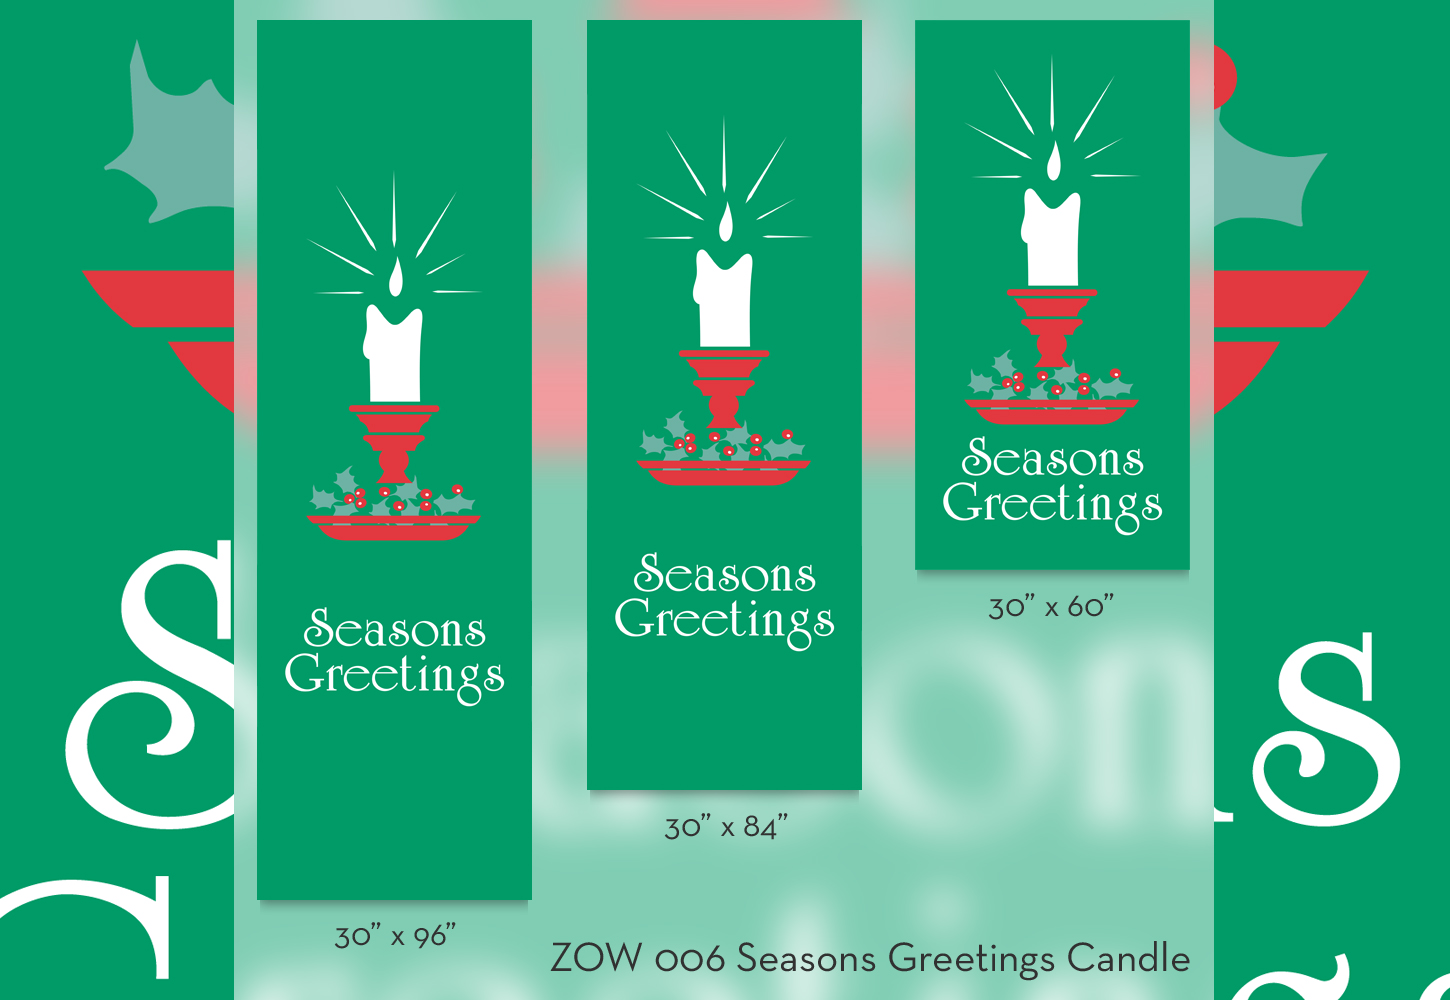 ZOW 006 Seasons Greetings Candle